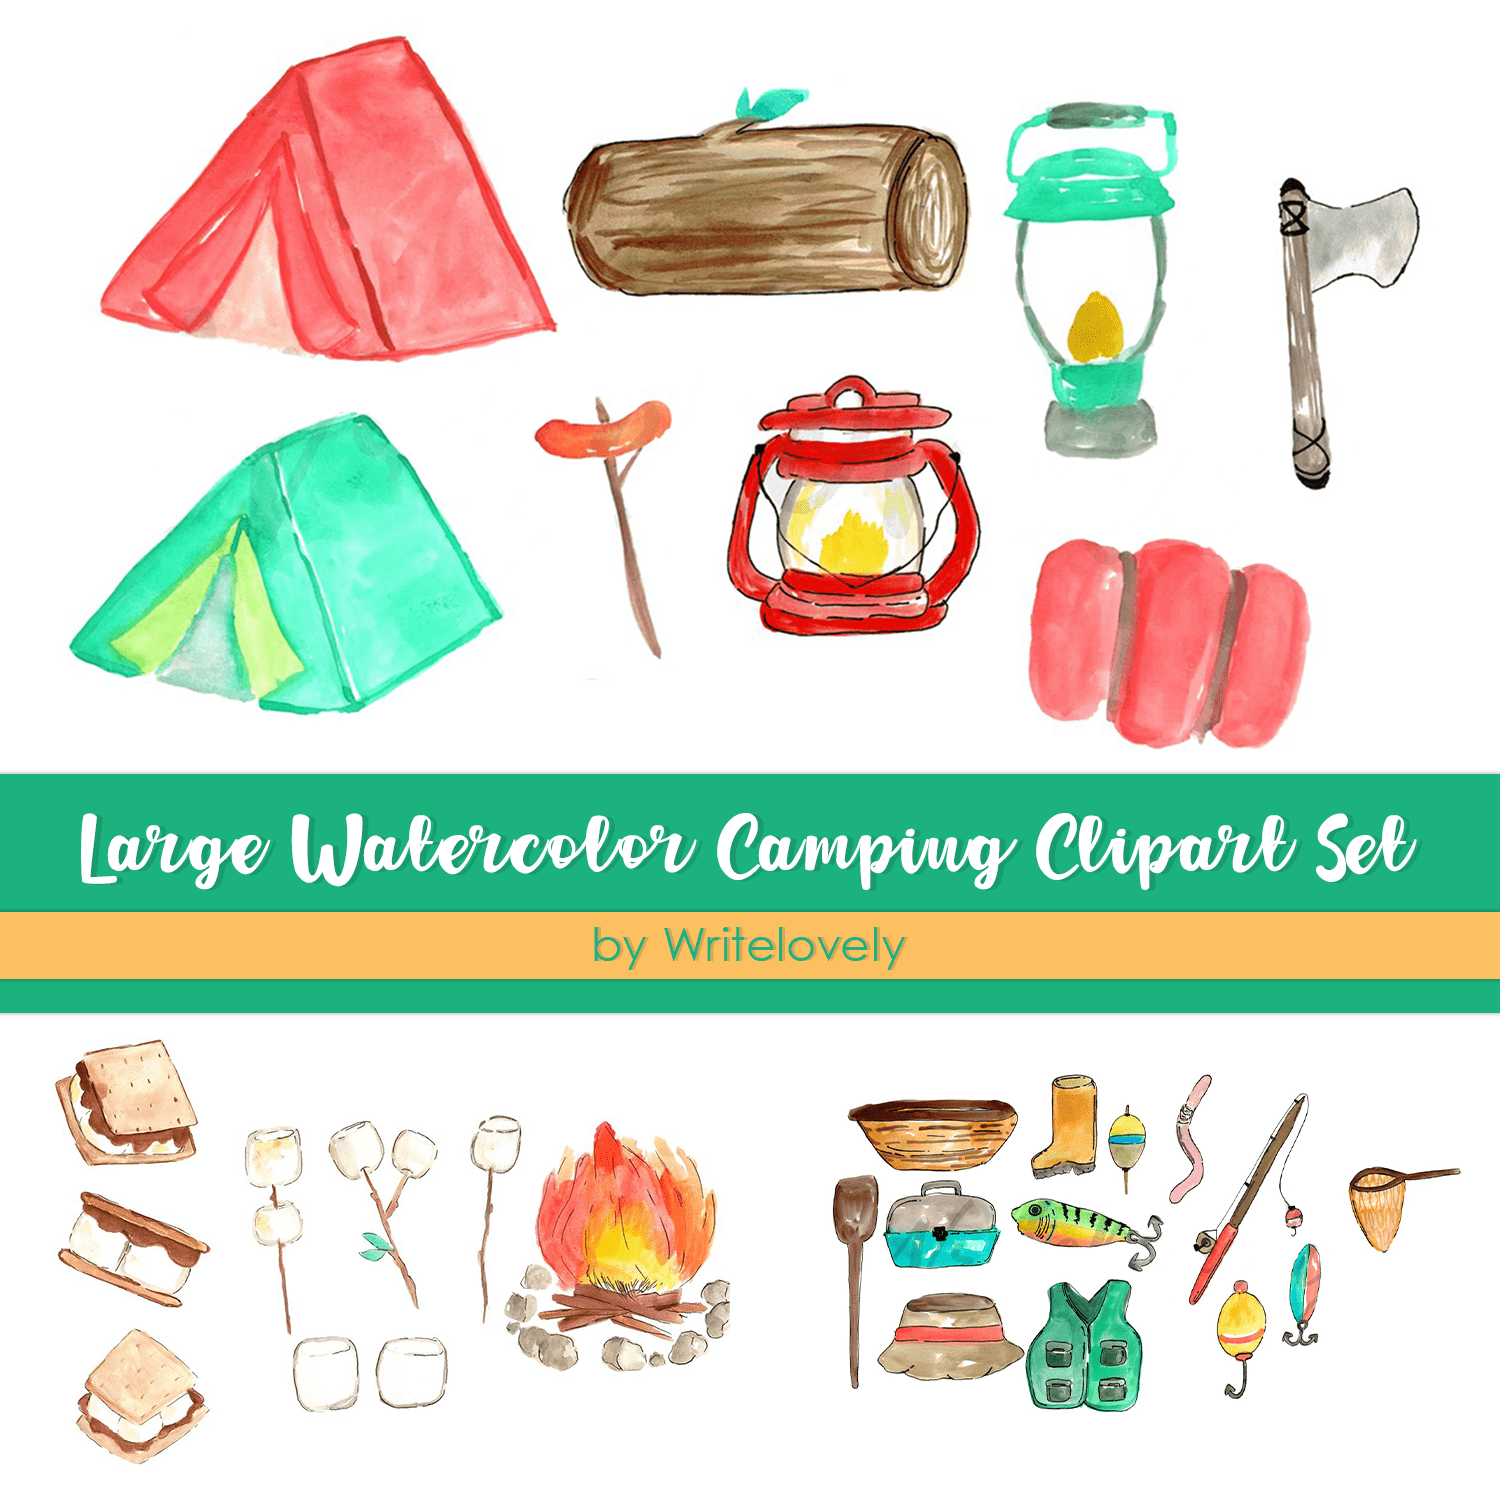 Large Watercolor Camping Clipart Set created by Writelovely.